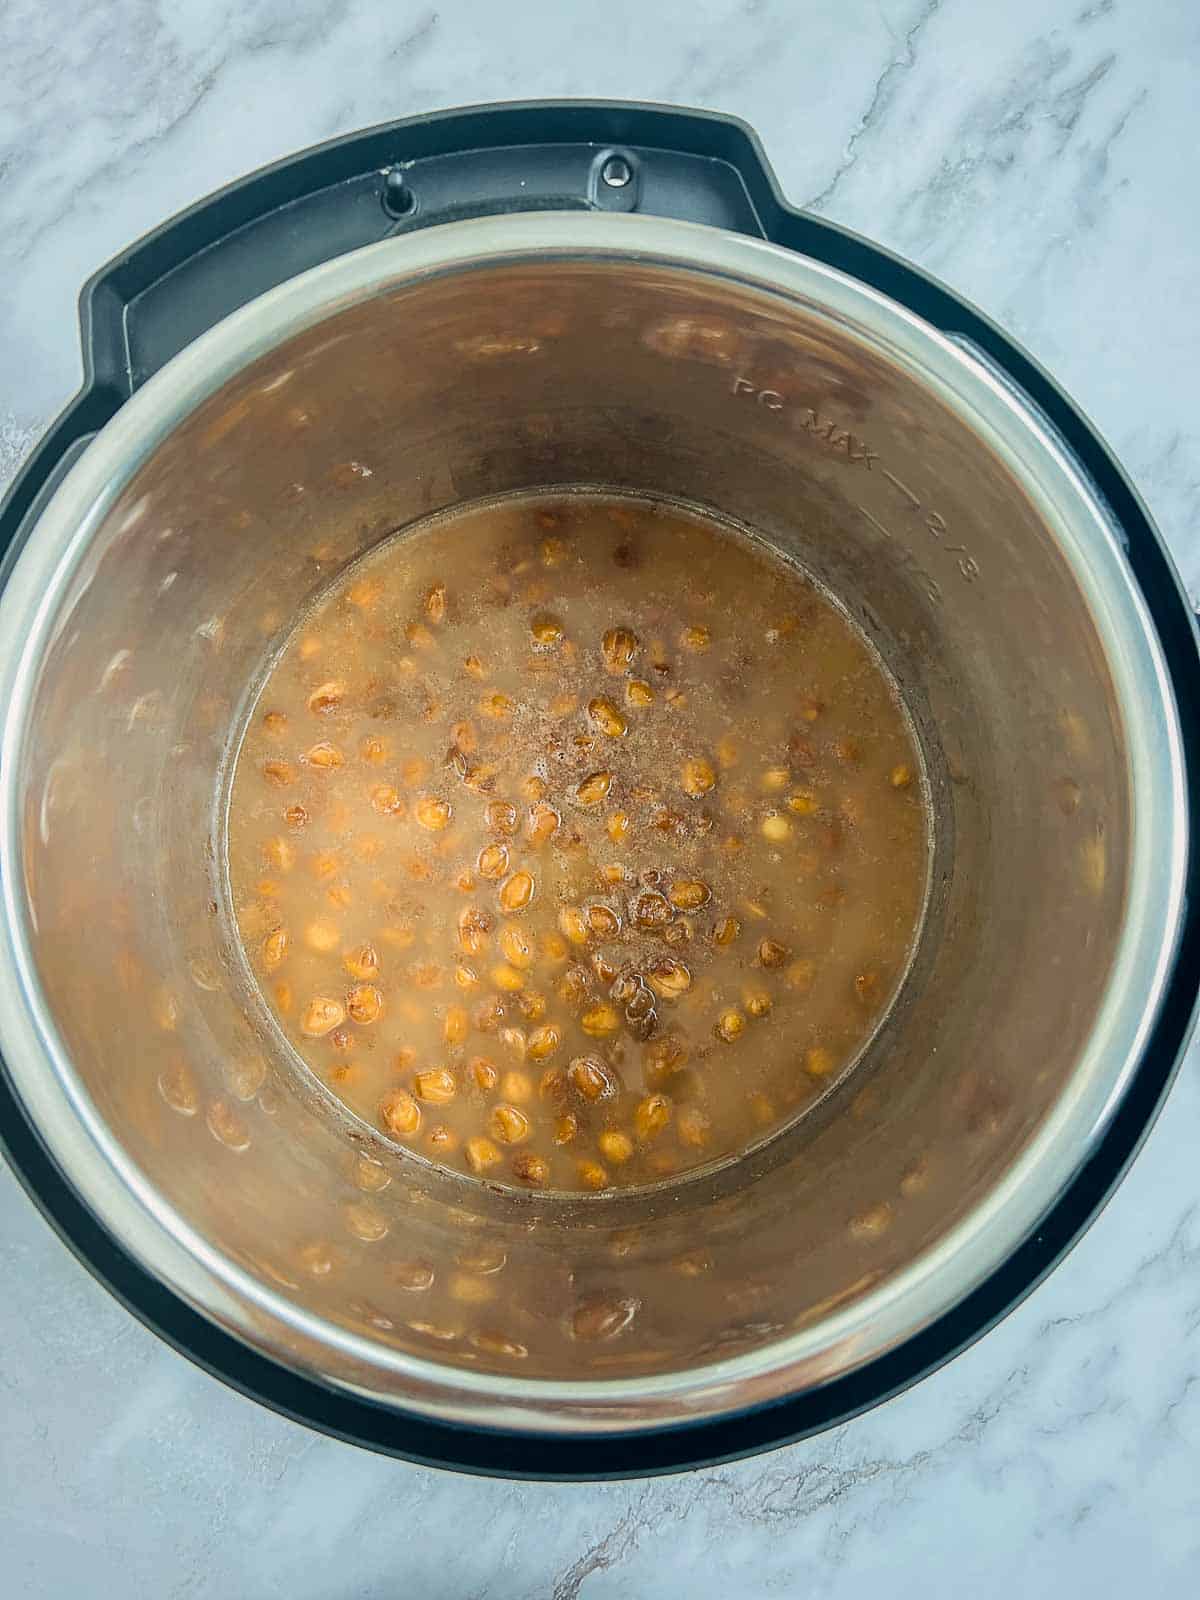 Cooked shelled peanuts in Instant Pot.